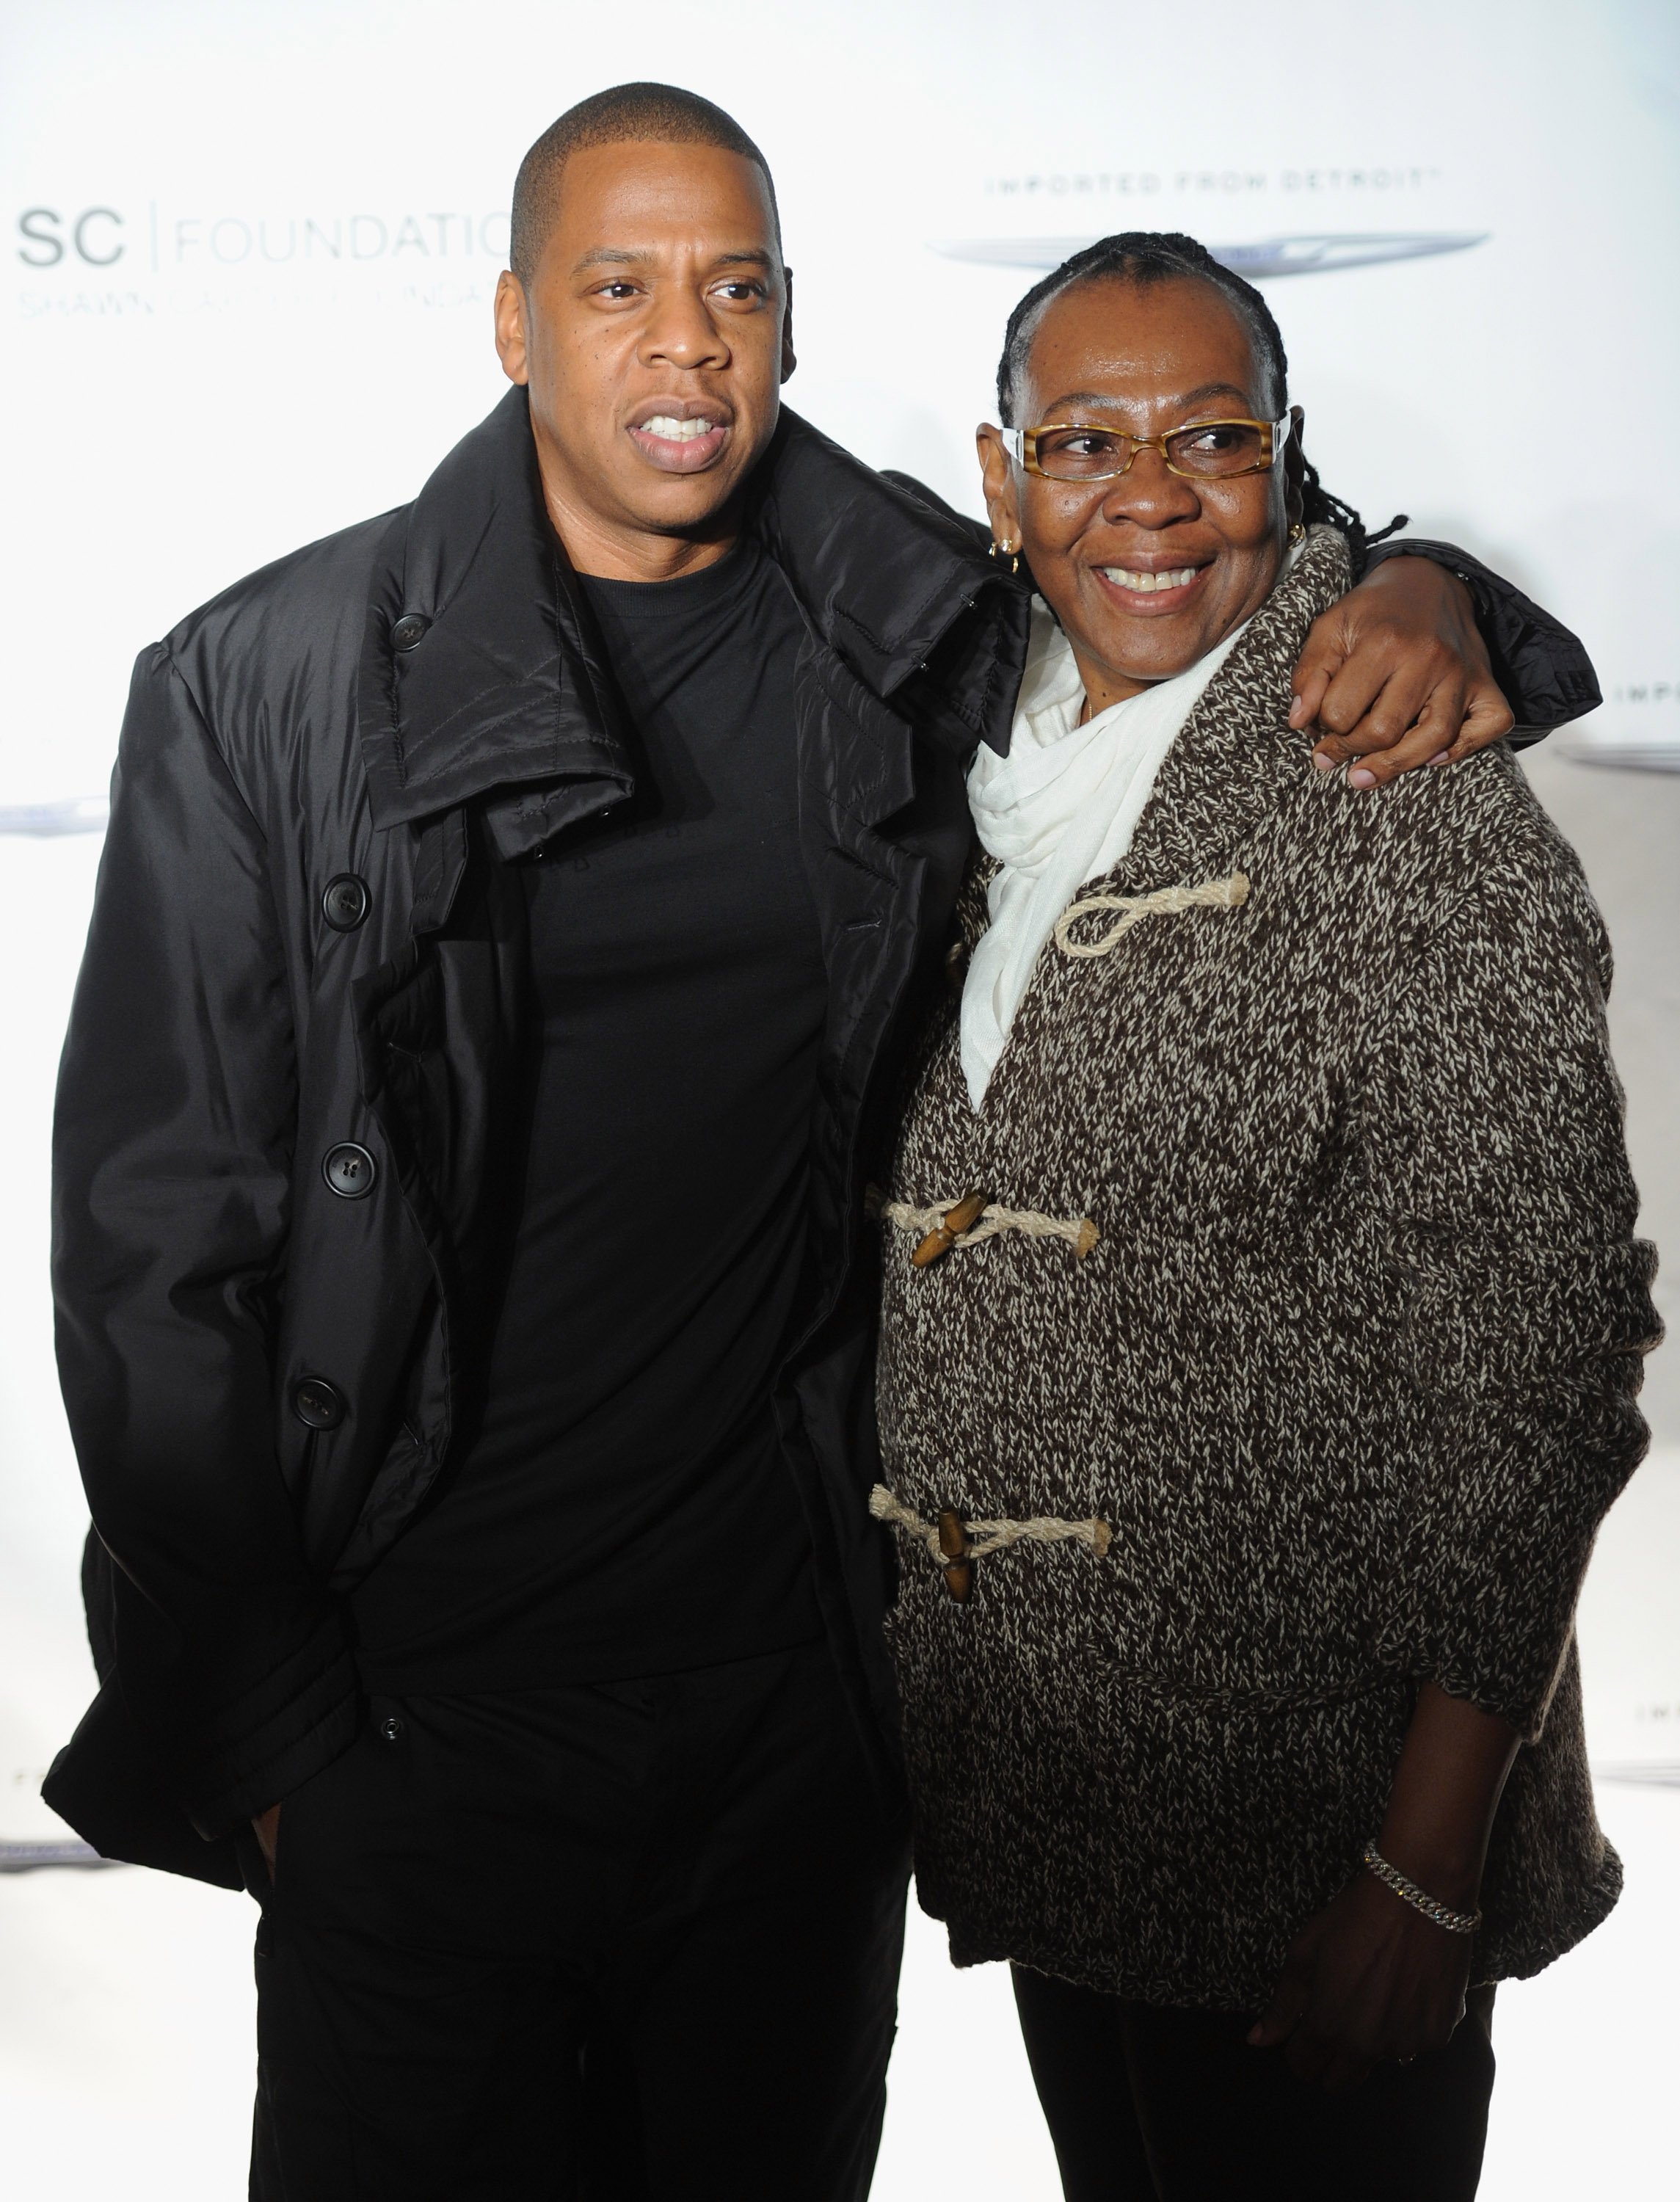 Jay-Z and Gloria Carter at "Making The Ordinary Extraordinary" at Pier 54 in New York City, on September 29, 2011. | Source: Getty Images